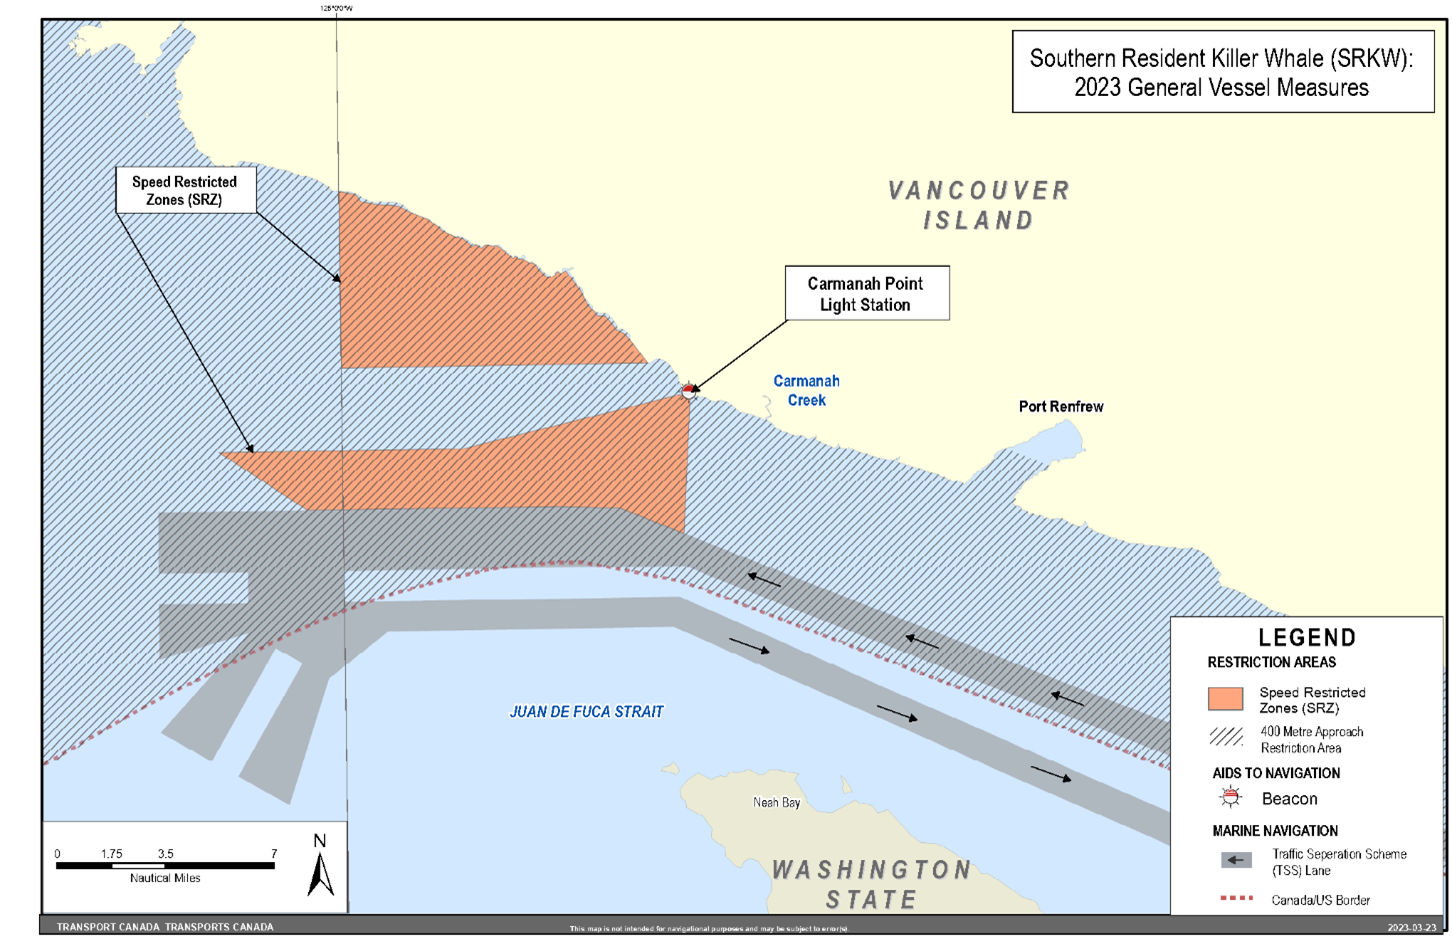 Rectangular map in grey, blue and yellow. It shows the speed restricted zones in orange, around Vancouver Island and Washington State. This is part of the general vessel measures for the Southern Resident Killer Whales. 